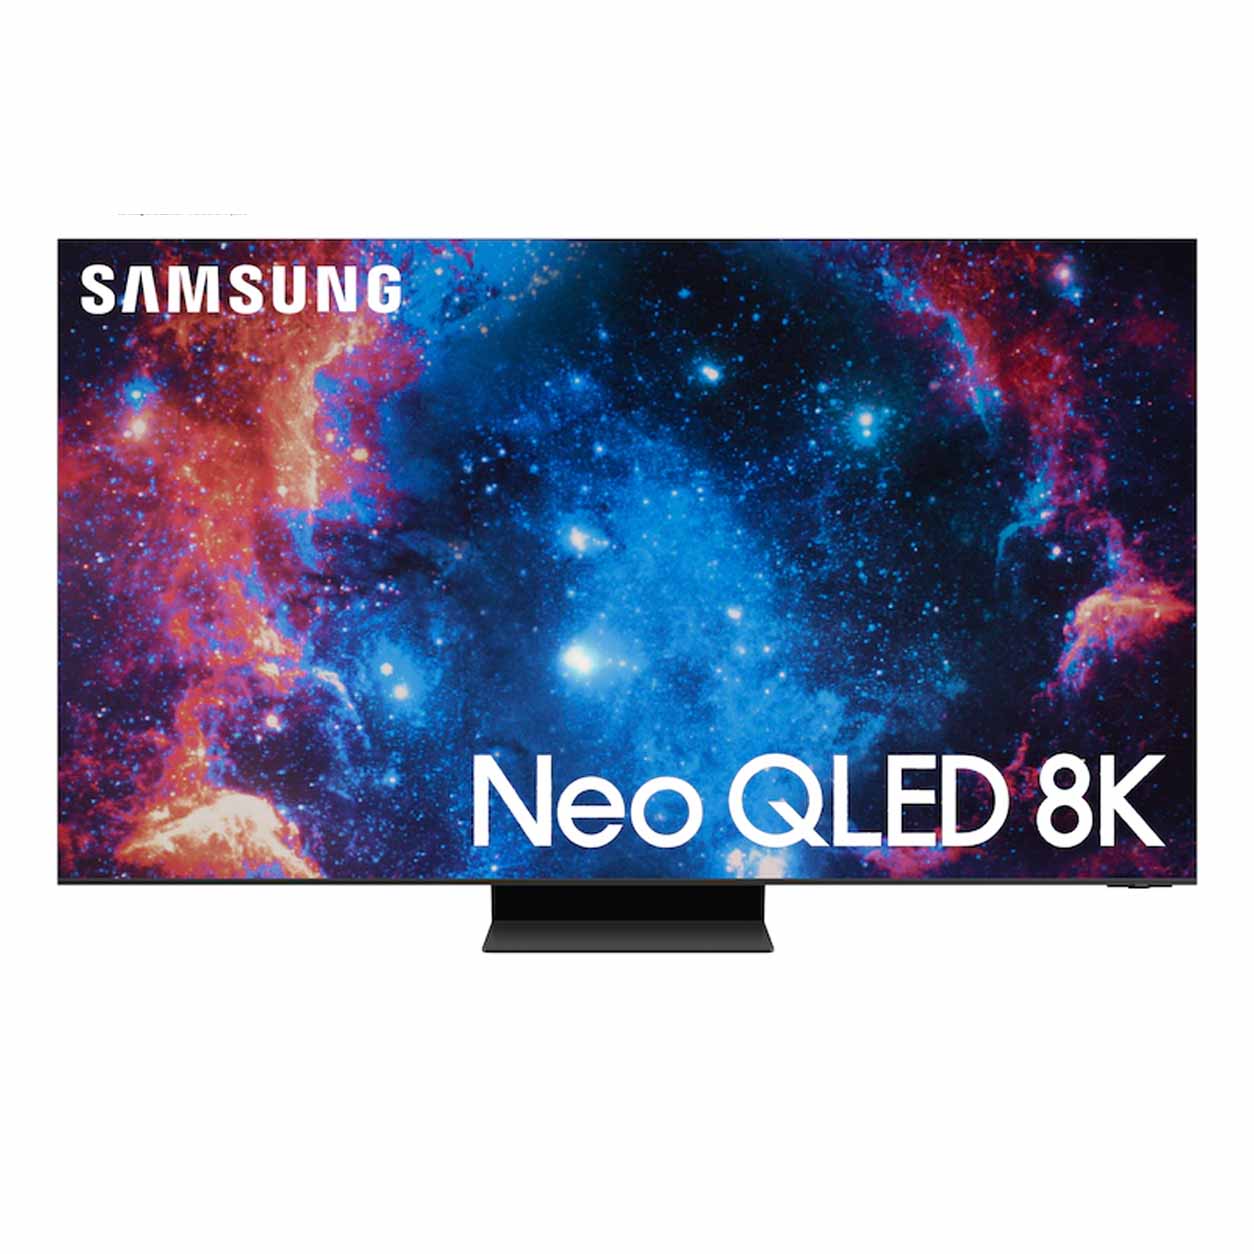 85 inch Samsung Neo QLED 8K TV with a colorful background